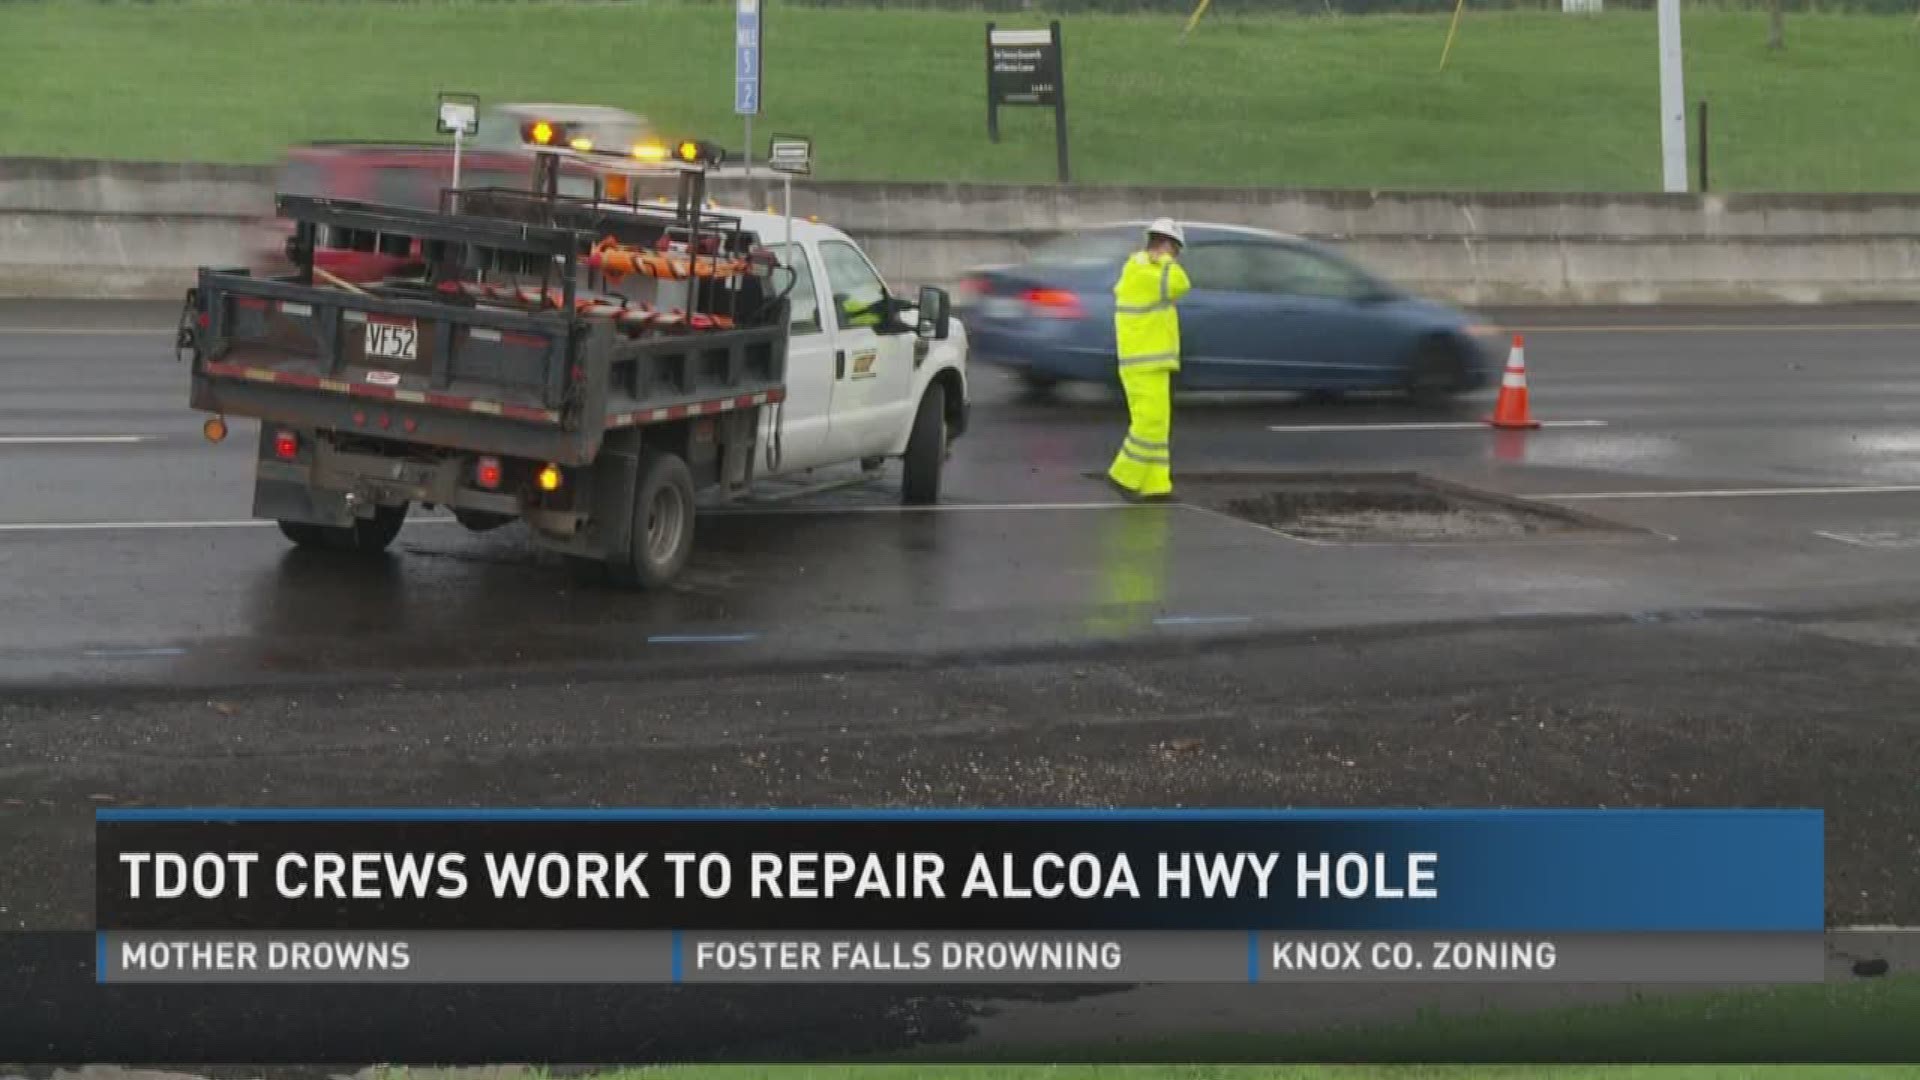 The lane closure is in the northbound lane of Alcoa Highway near the University of Tennessee Medical Center.